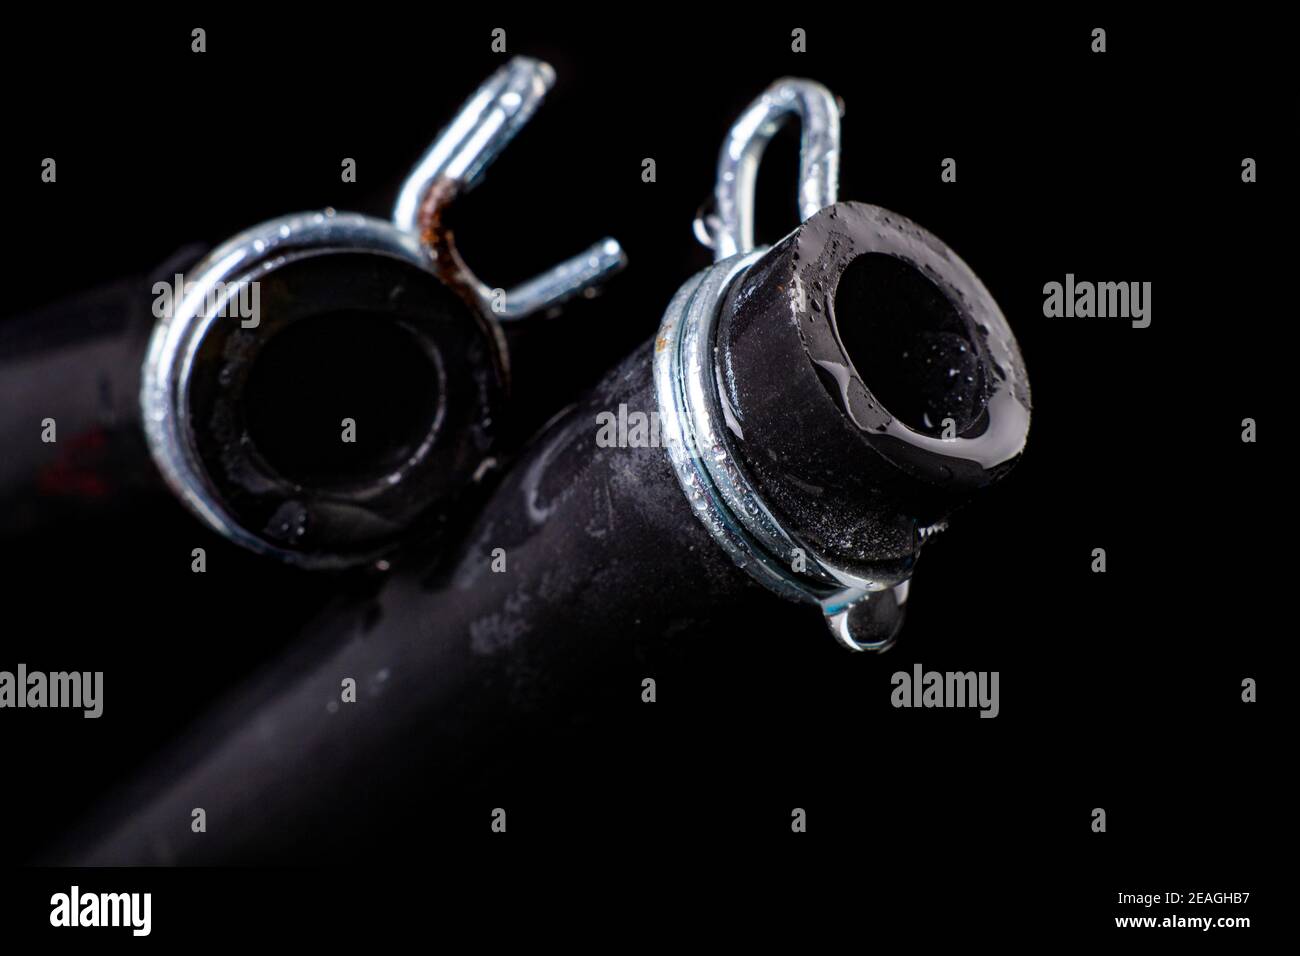 Wet black hose with metal clamp. Accessories and spare parts for plumbers who renovate water and sewage systems. Black background. Stock Photo